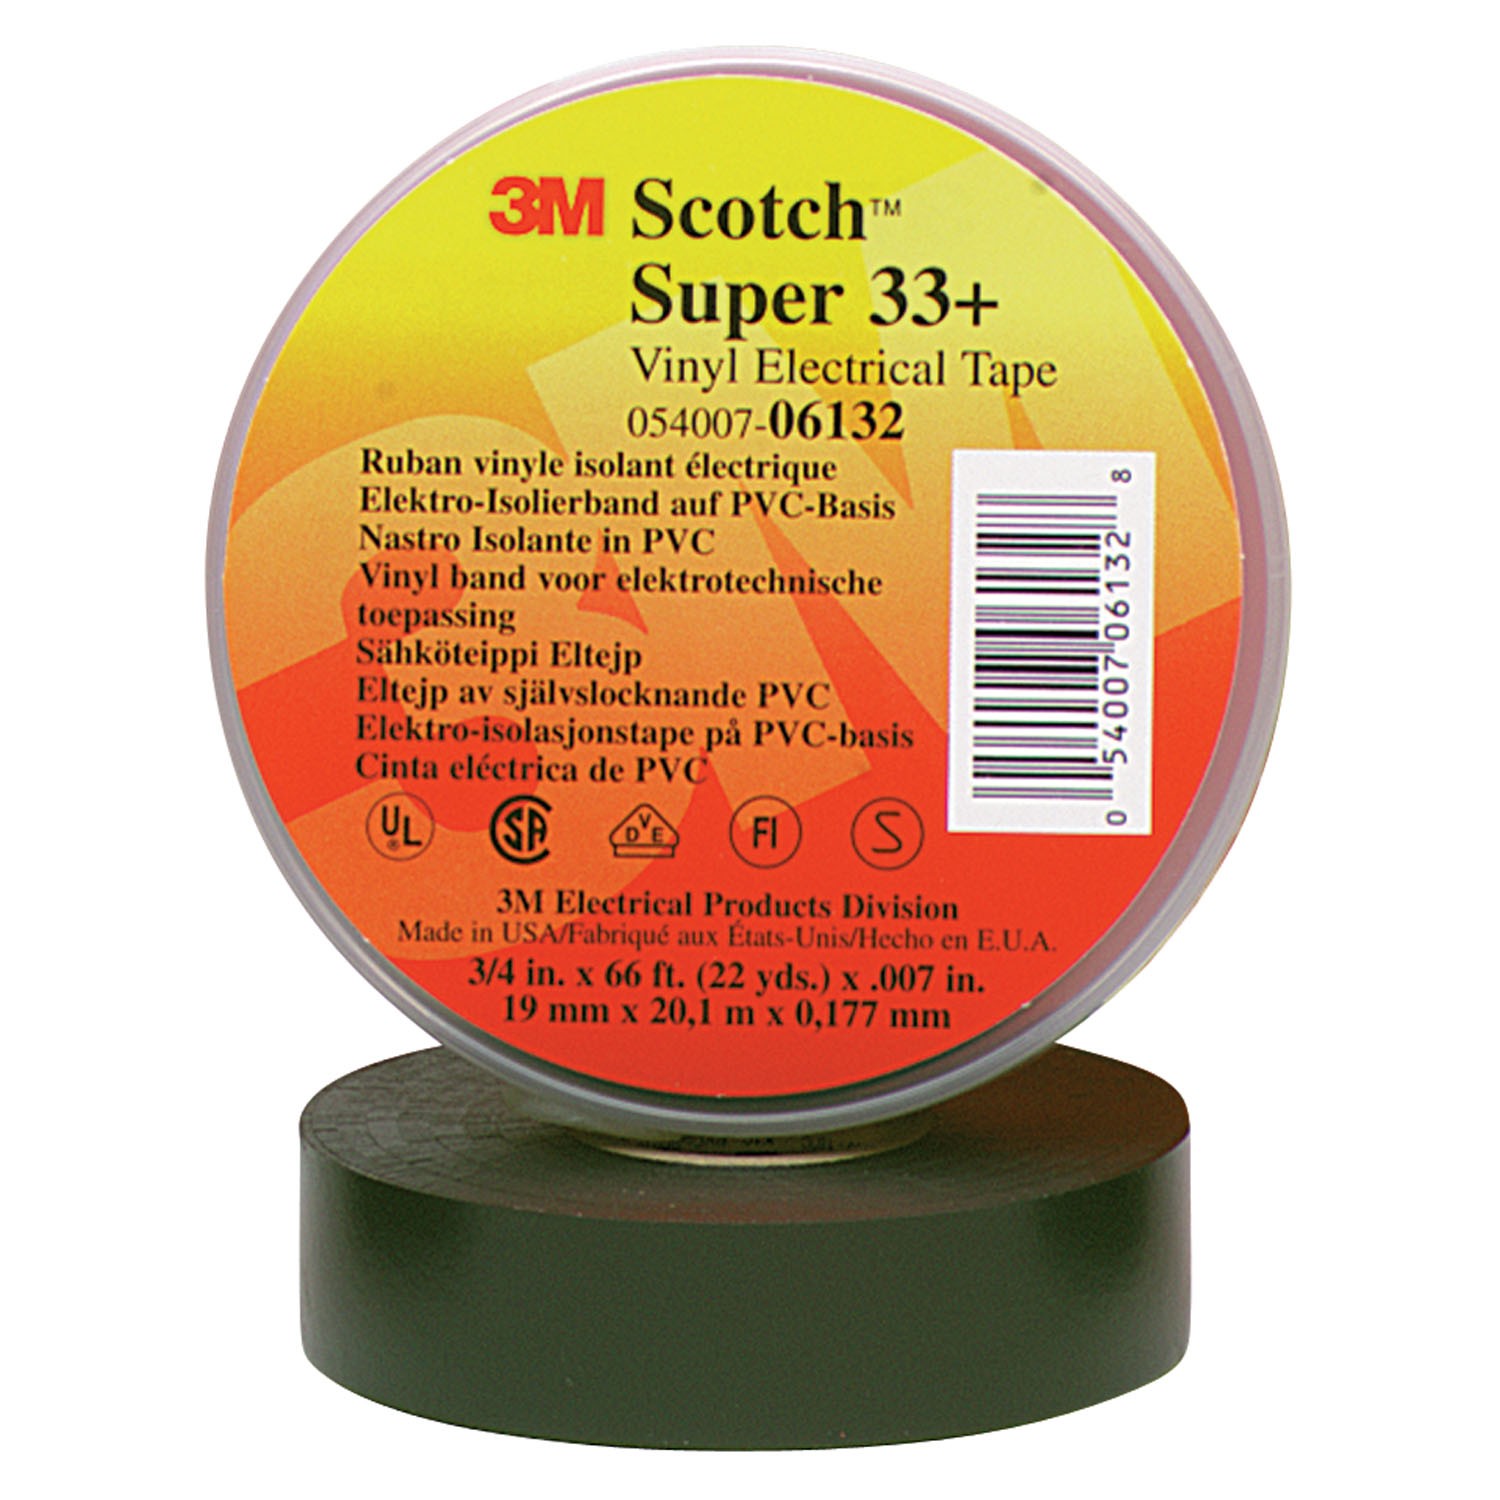 SCOTCH 23 3/4 TAPE 3M Electronic Specialty